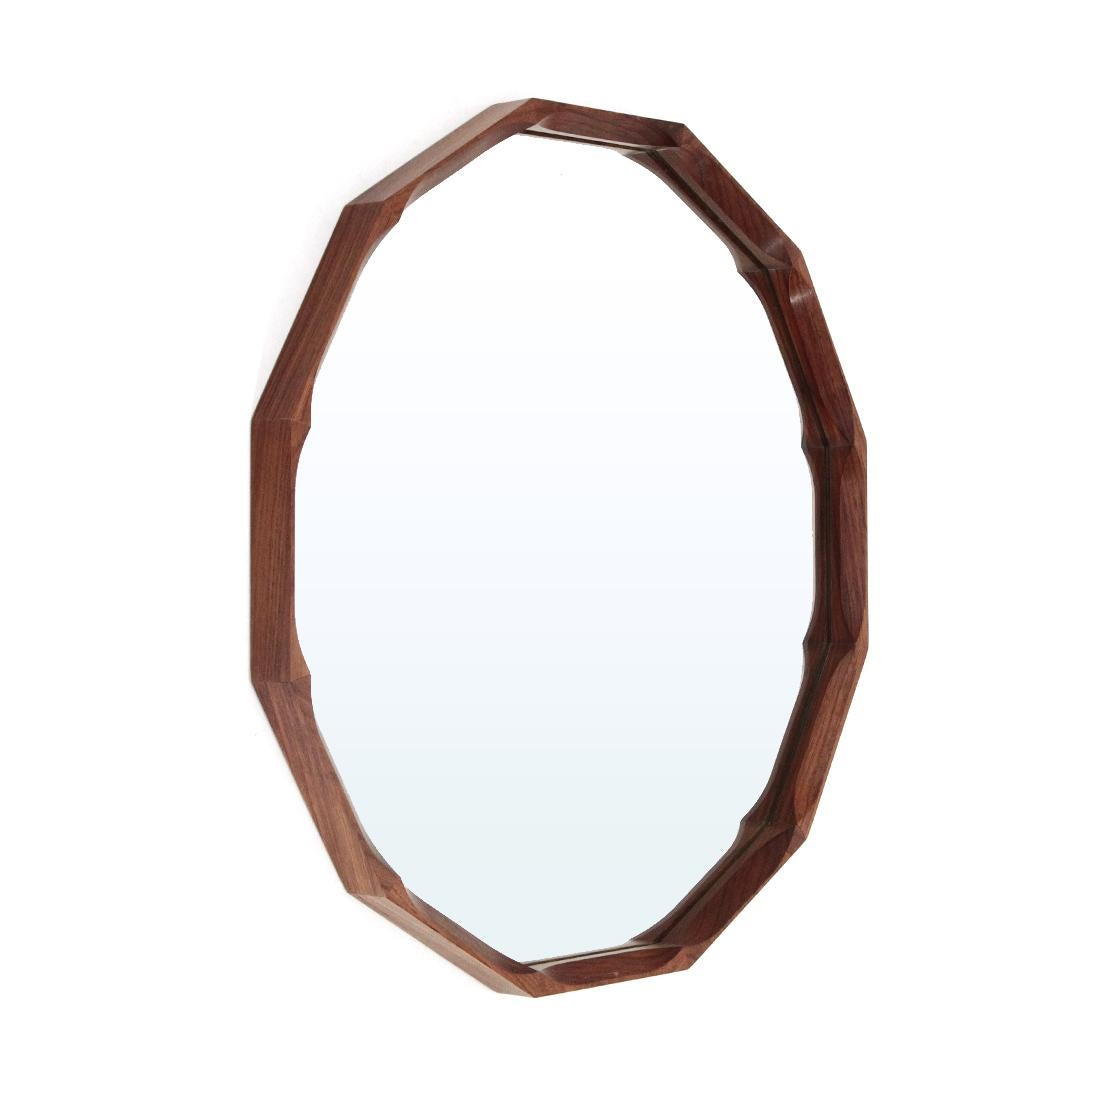 Mirror produced in the 1960s by Tredici.
Dodecagonal wooden frame with faceted edges.
Mirror.
Good general condition, some signs due to normal use over time. Small lack of frame above the hook.

Dimensions: Diameter 63.5 cm, depth 3.5 cm.